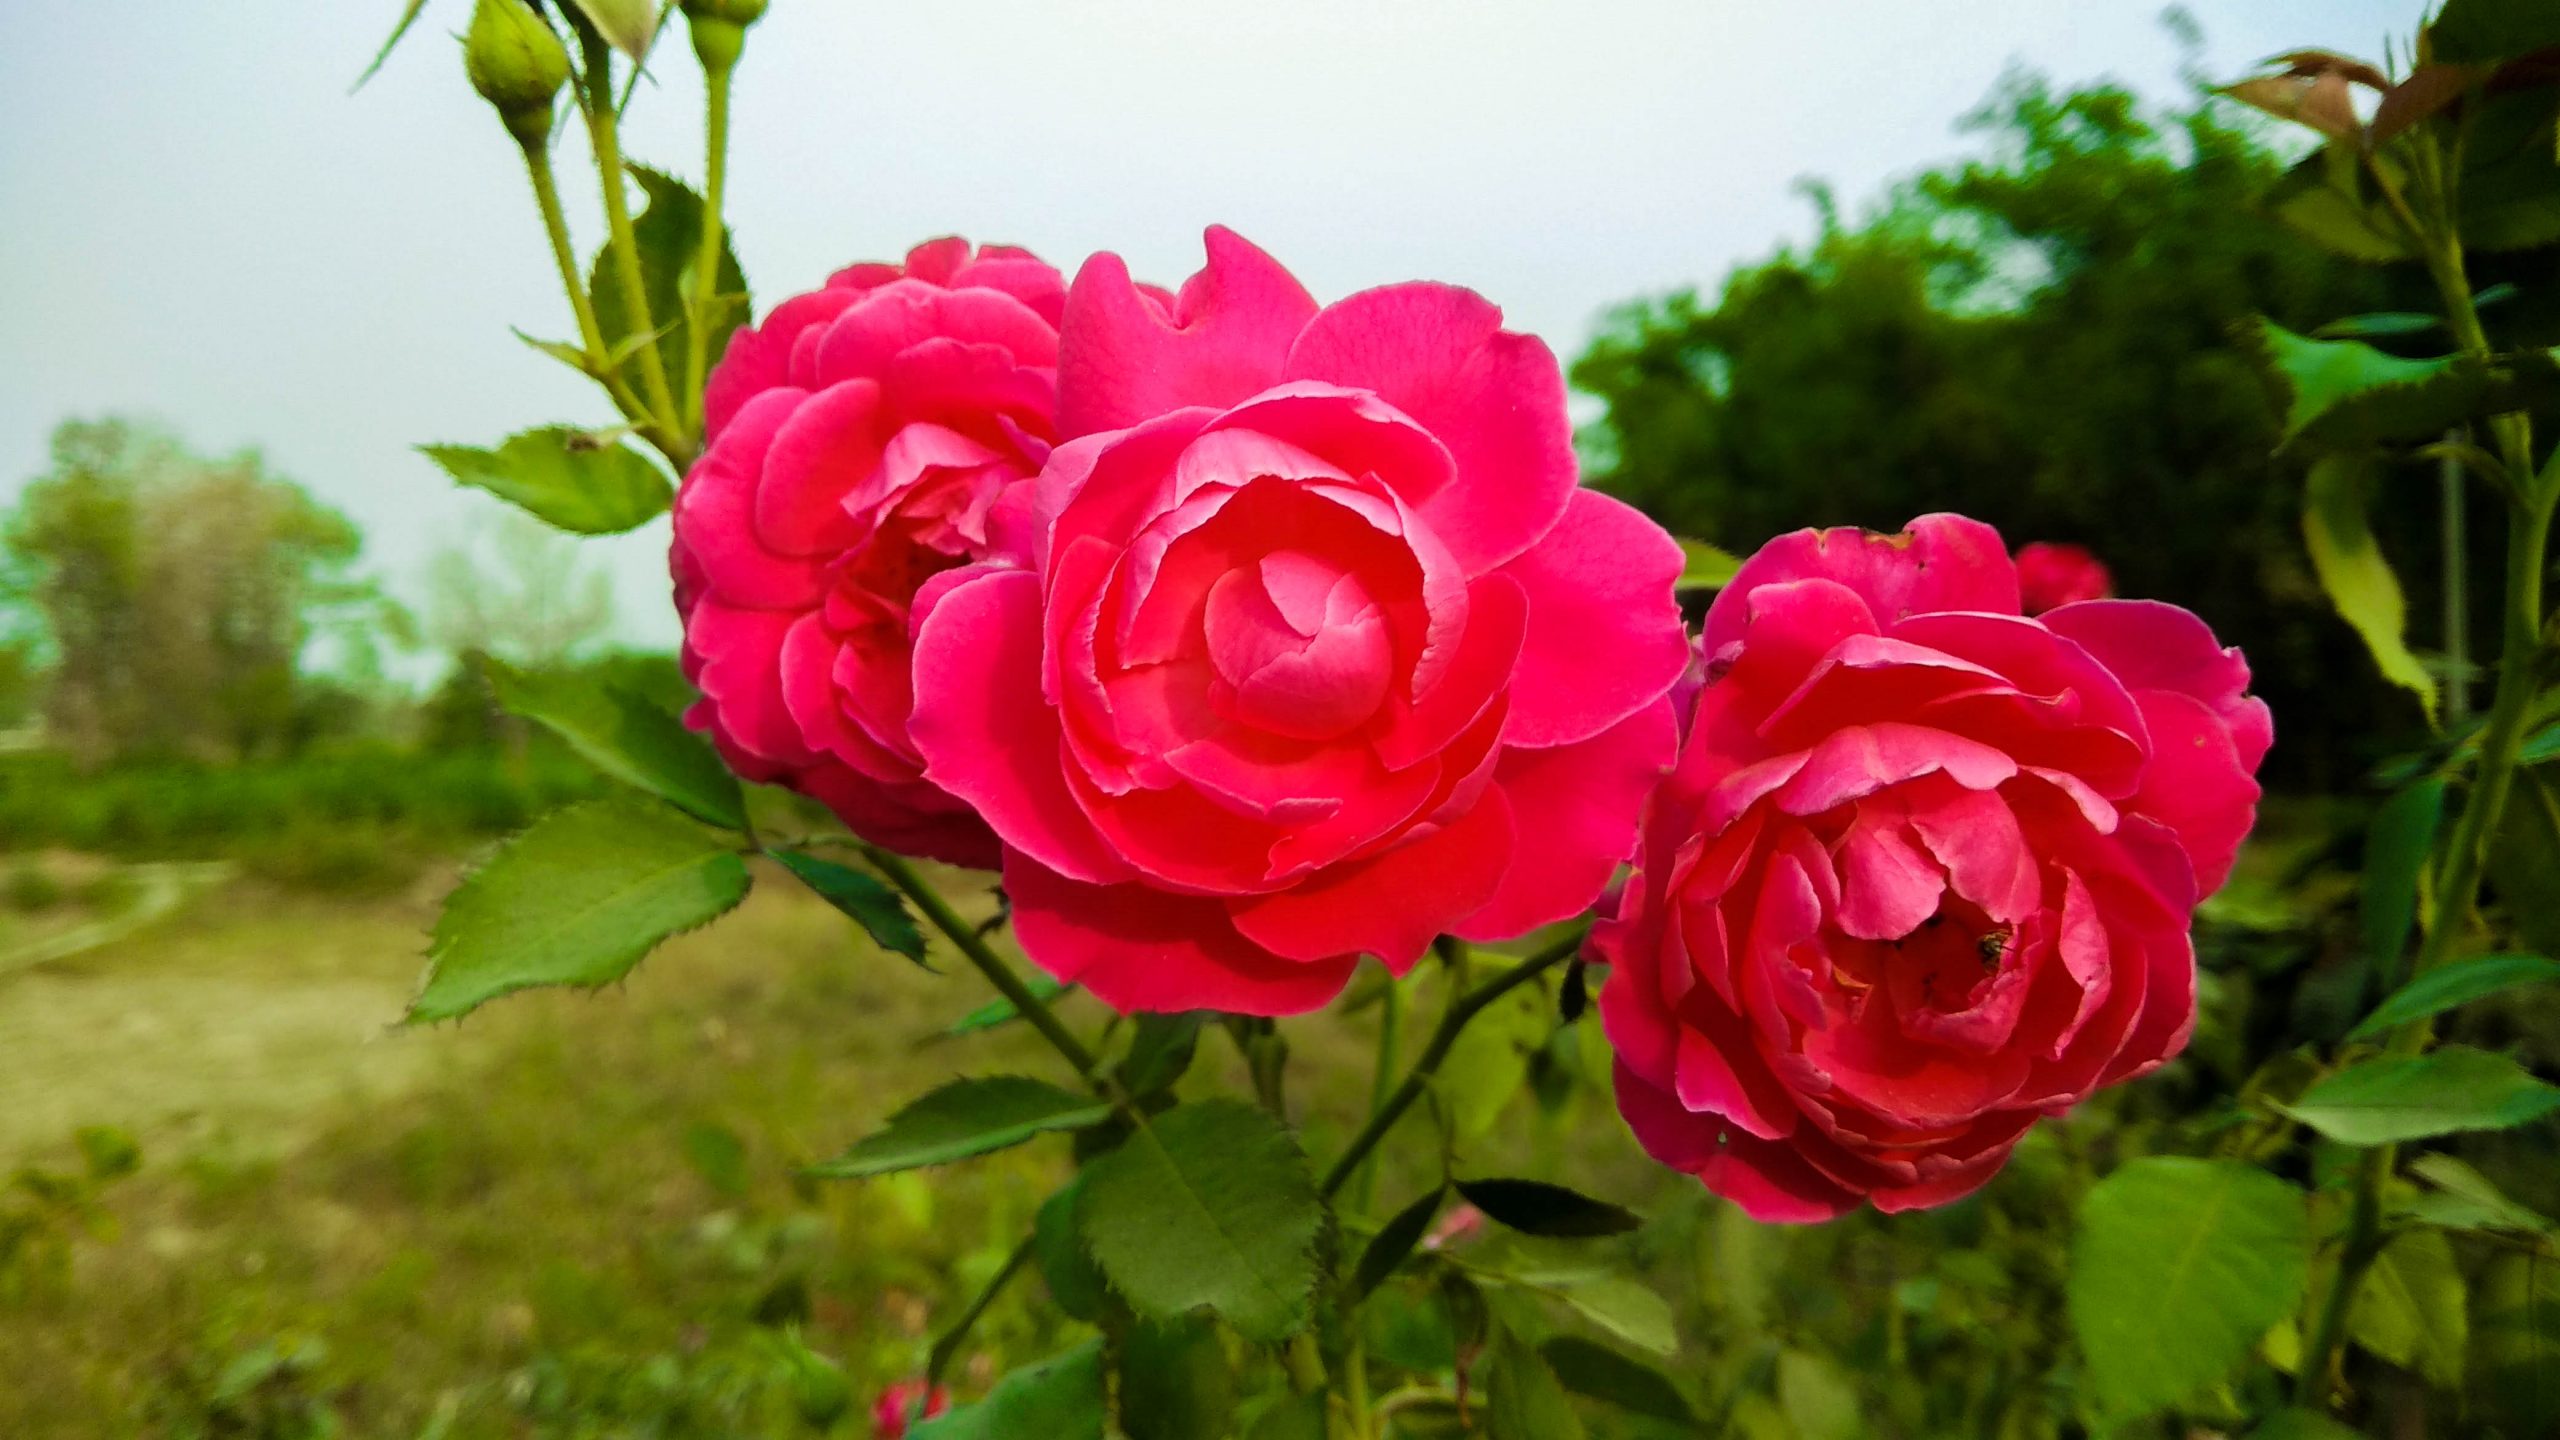 love rose photo download Free High Quility Image Download | The Mayanagari